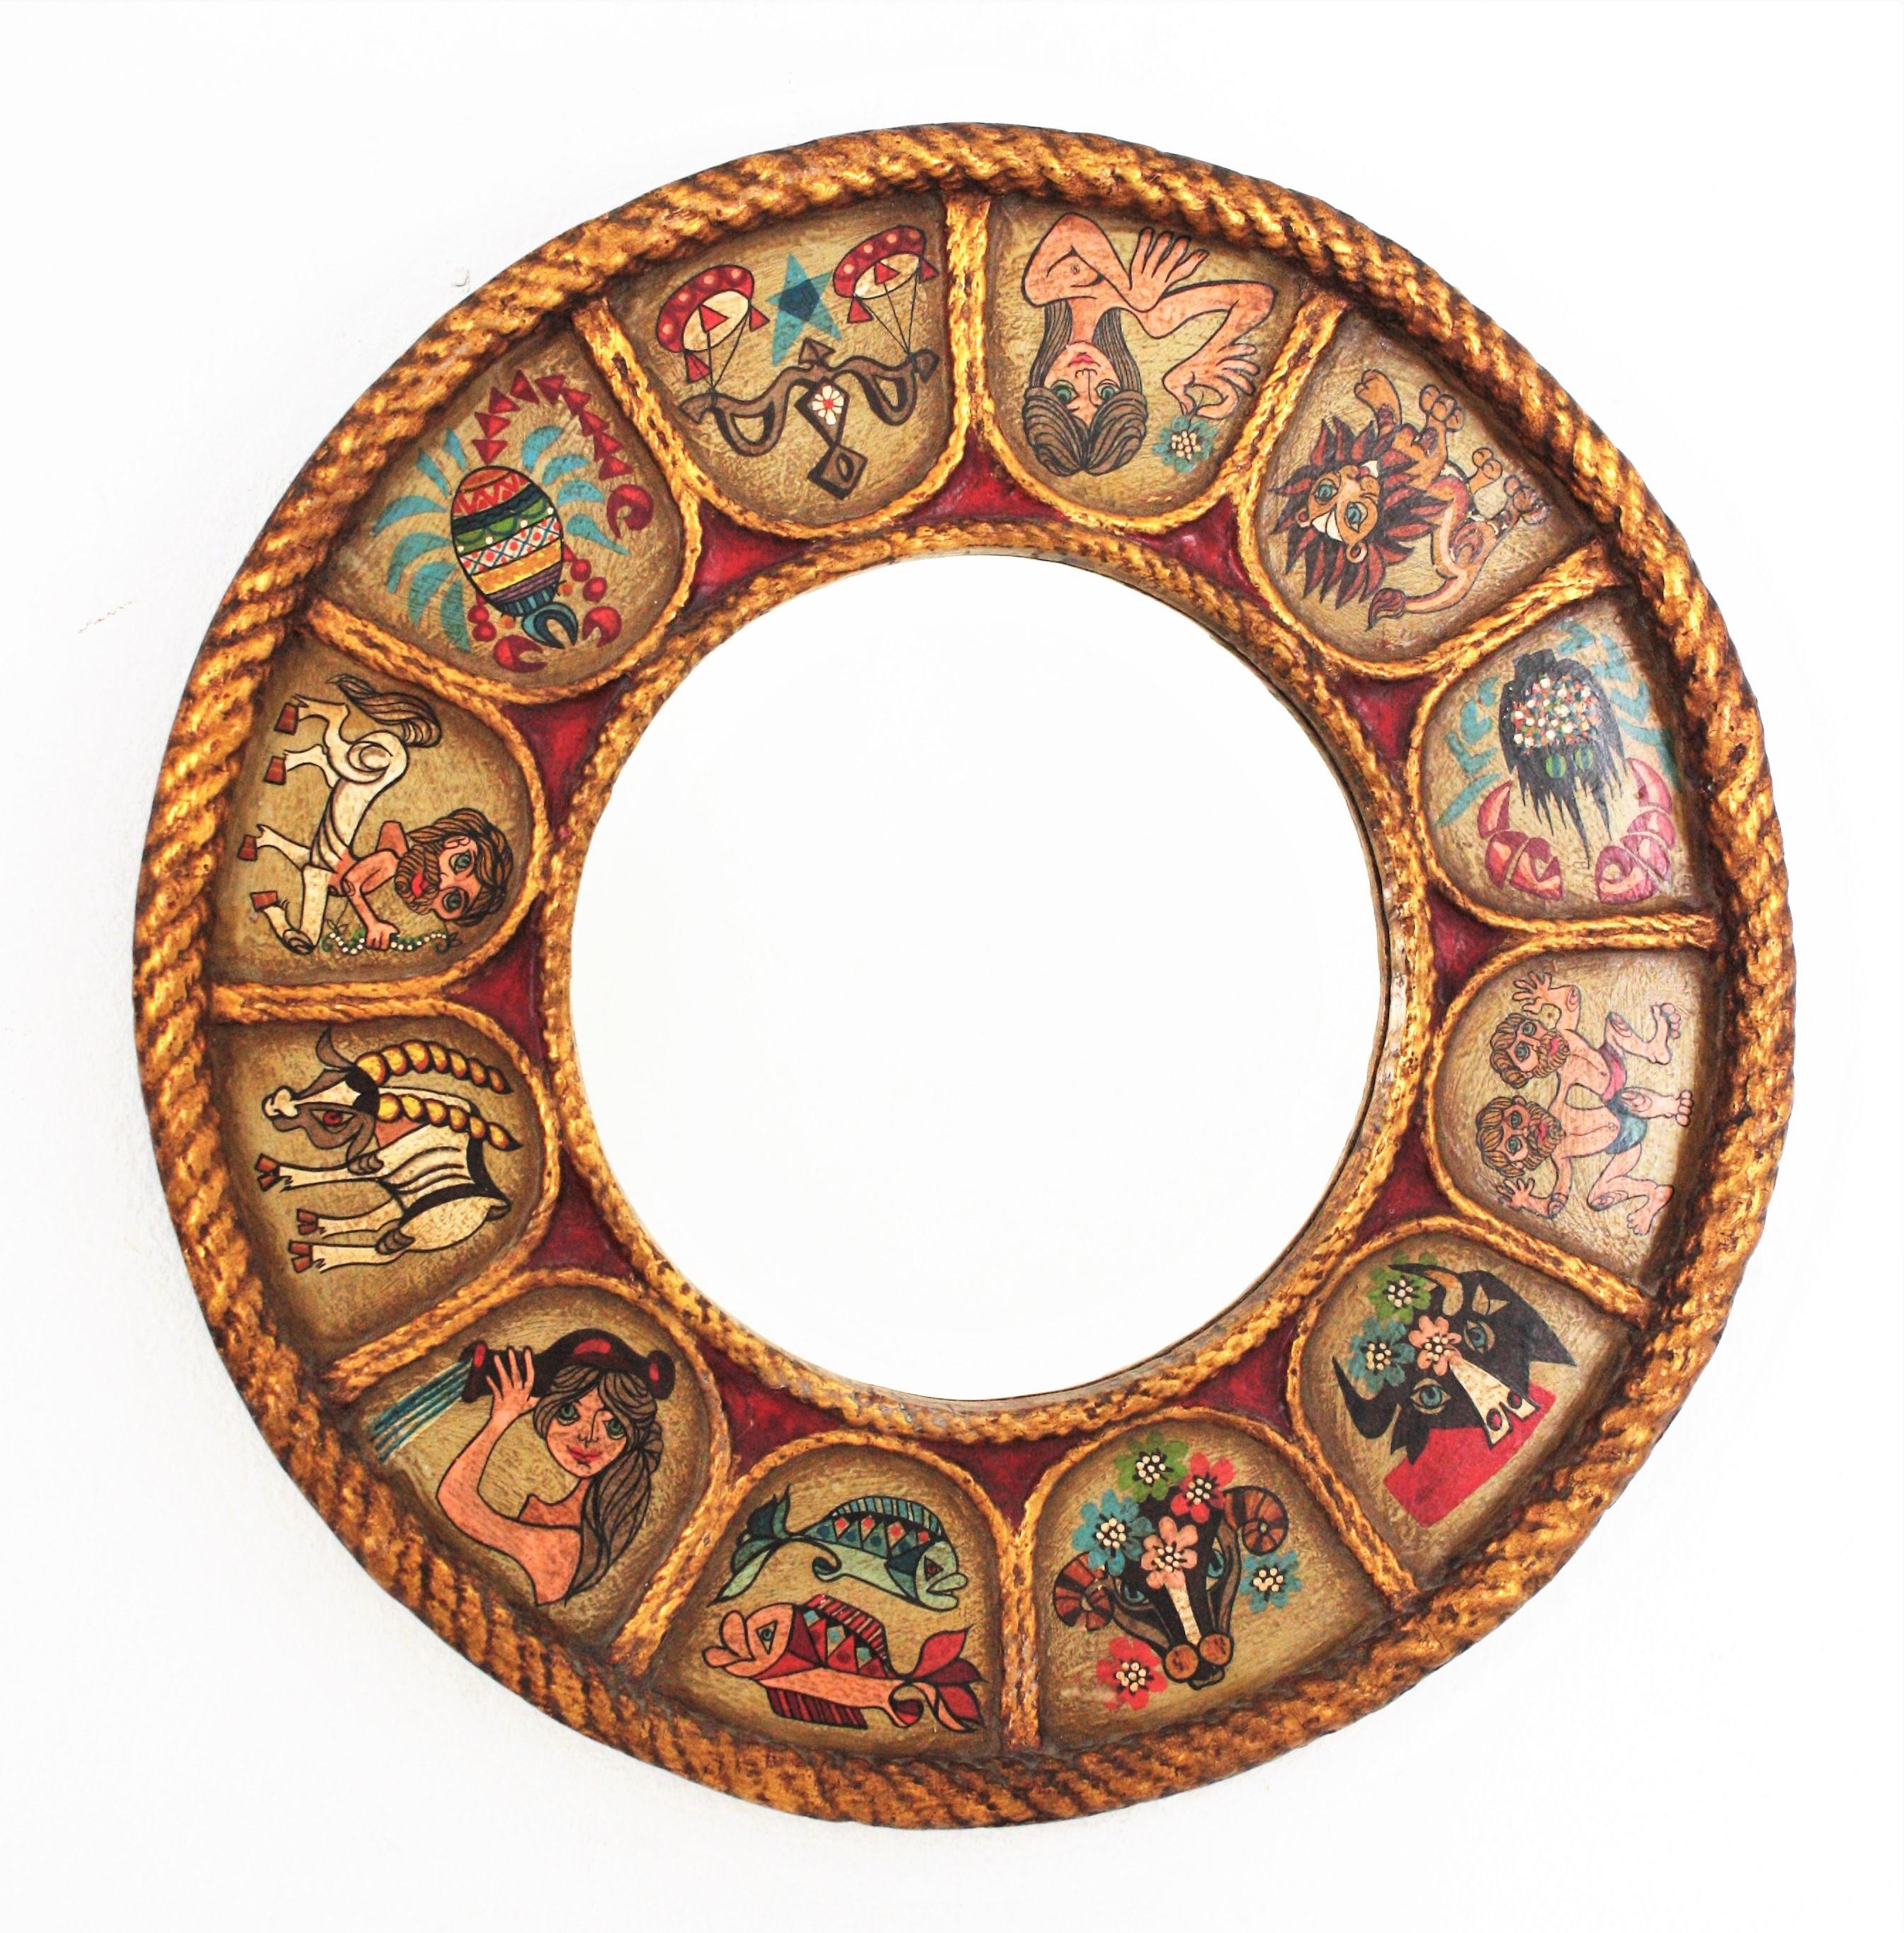 Zodiac round sunburst mirror in gilt polychrome wood, Spain, 1950s-1960s.
Handcrafted Horoscope mirror with giltwood round frame and hand painted polychromed 12 signs of zodiac arround the frame. 
Sunburst design surrounding the glass and Naif